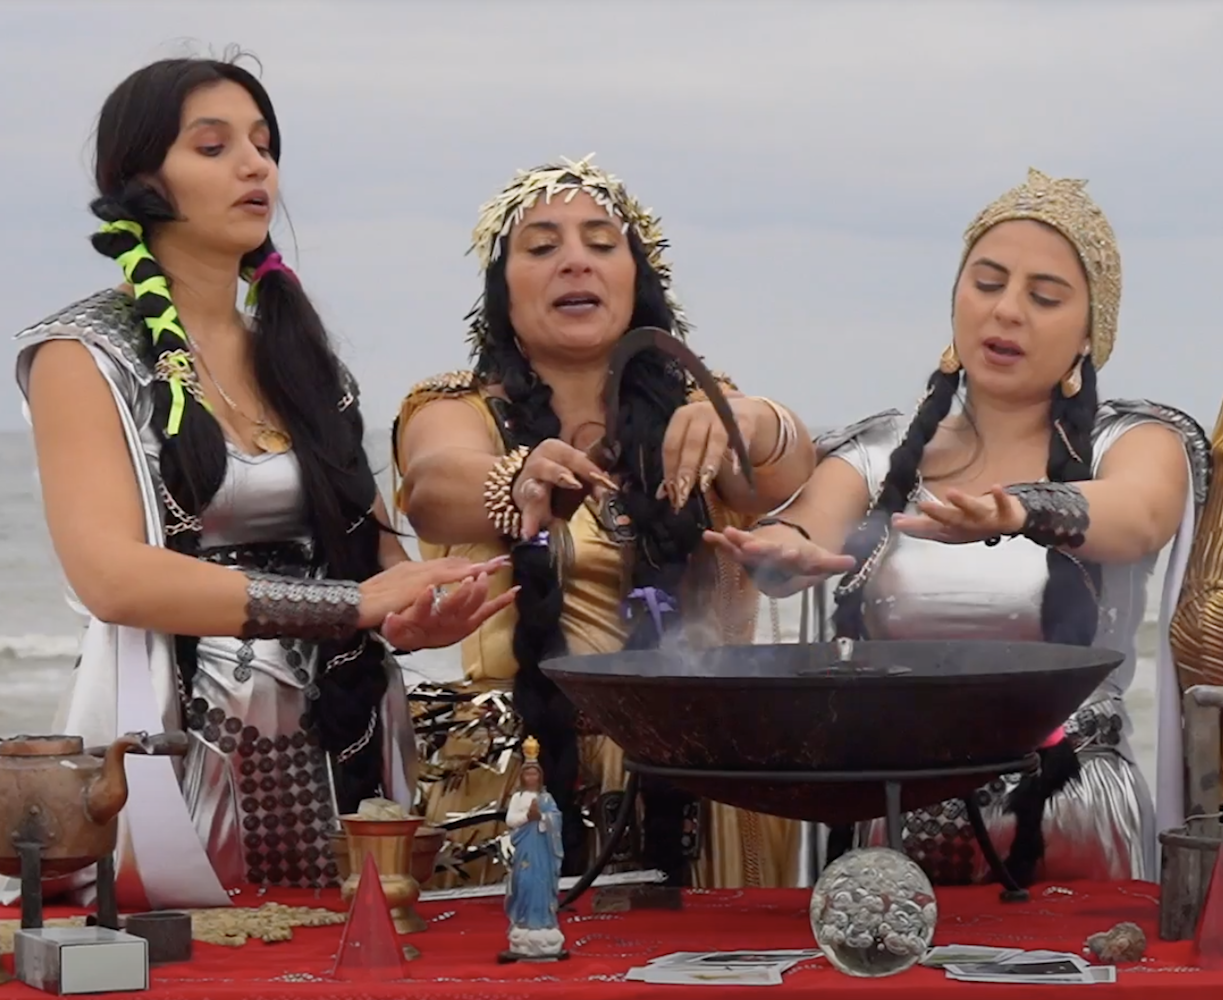 Roma witches against racism: watch ritual spells intended to heal historical trauma online